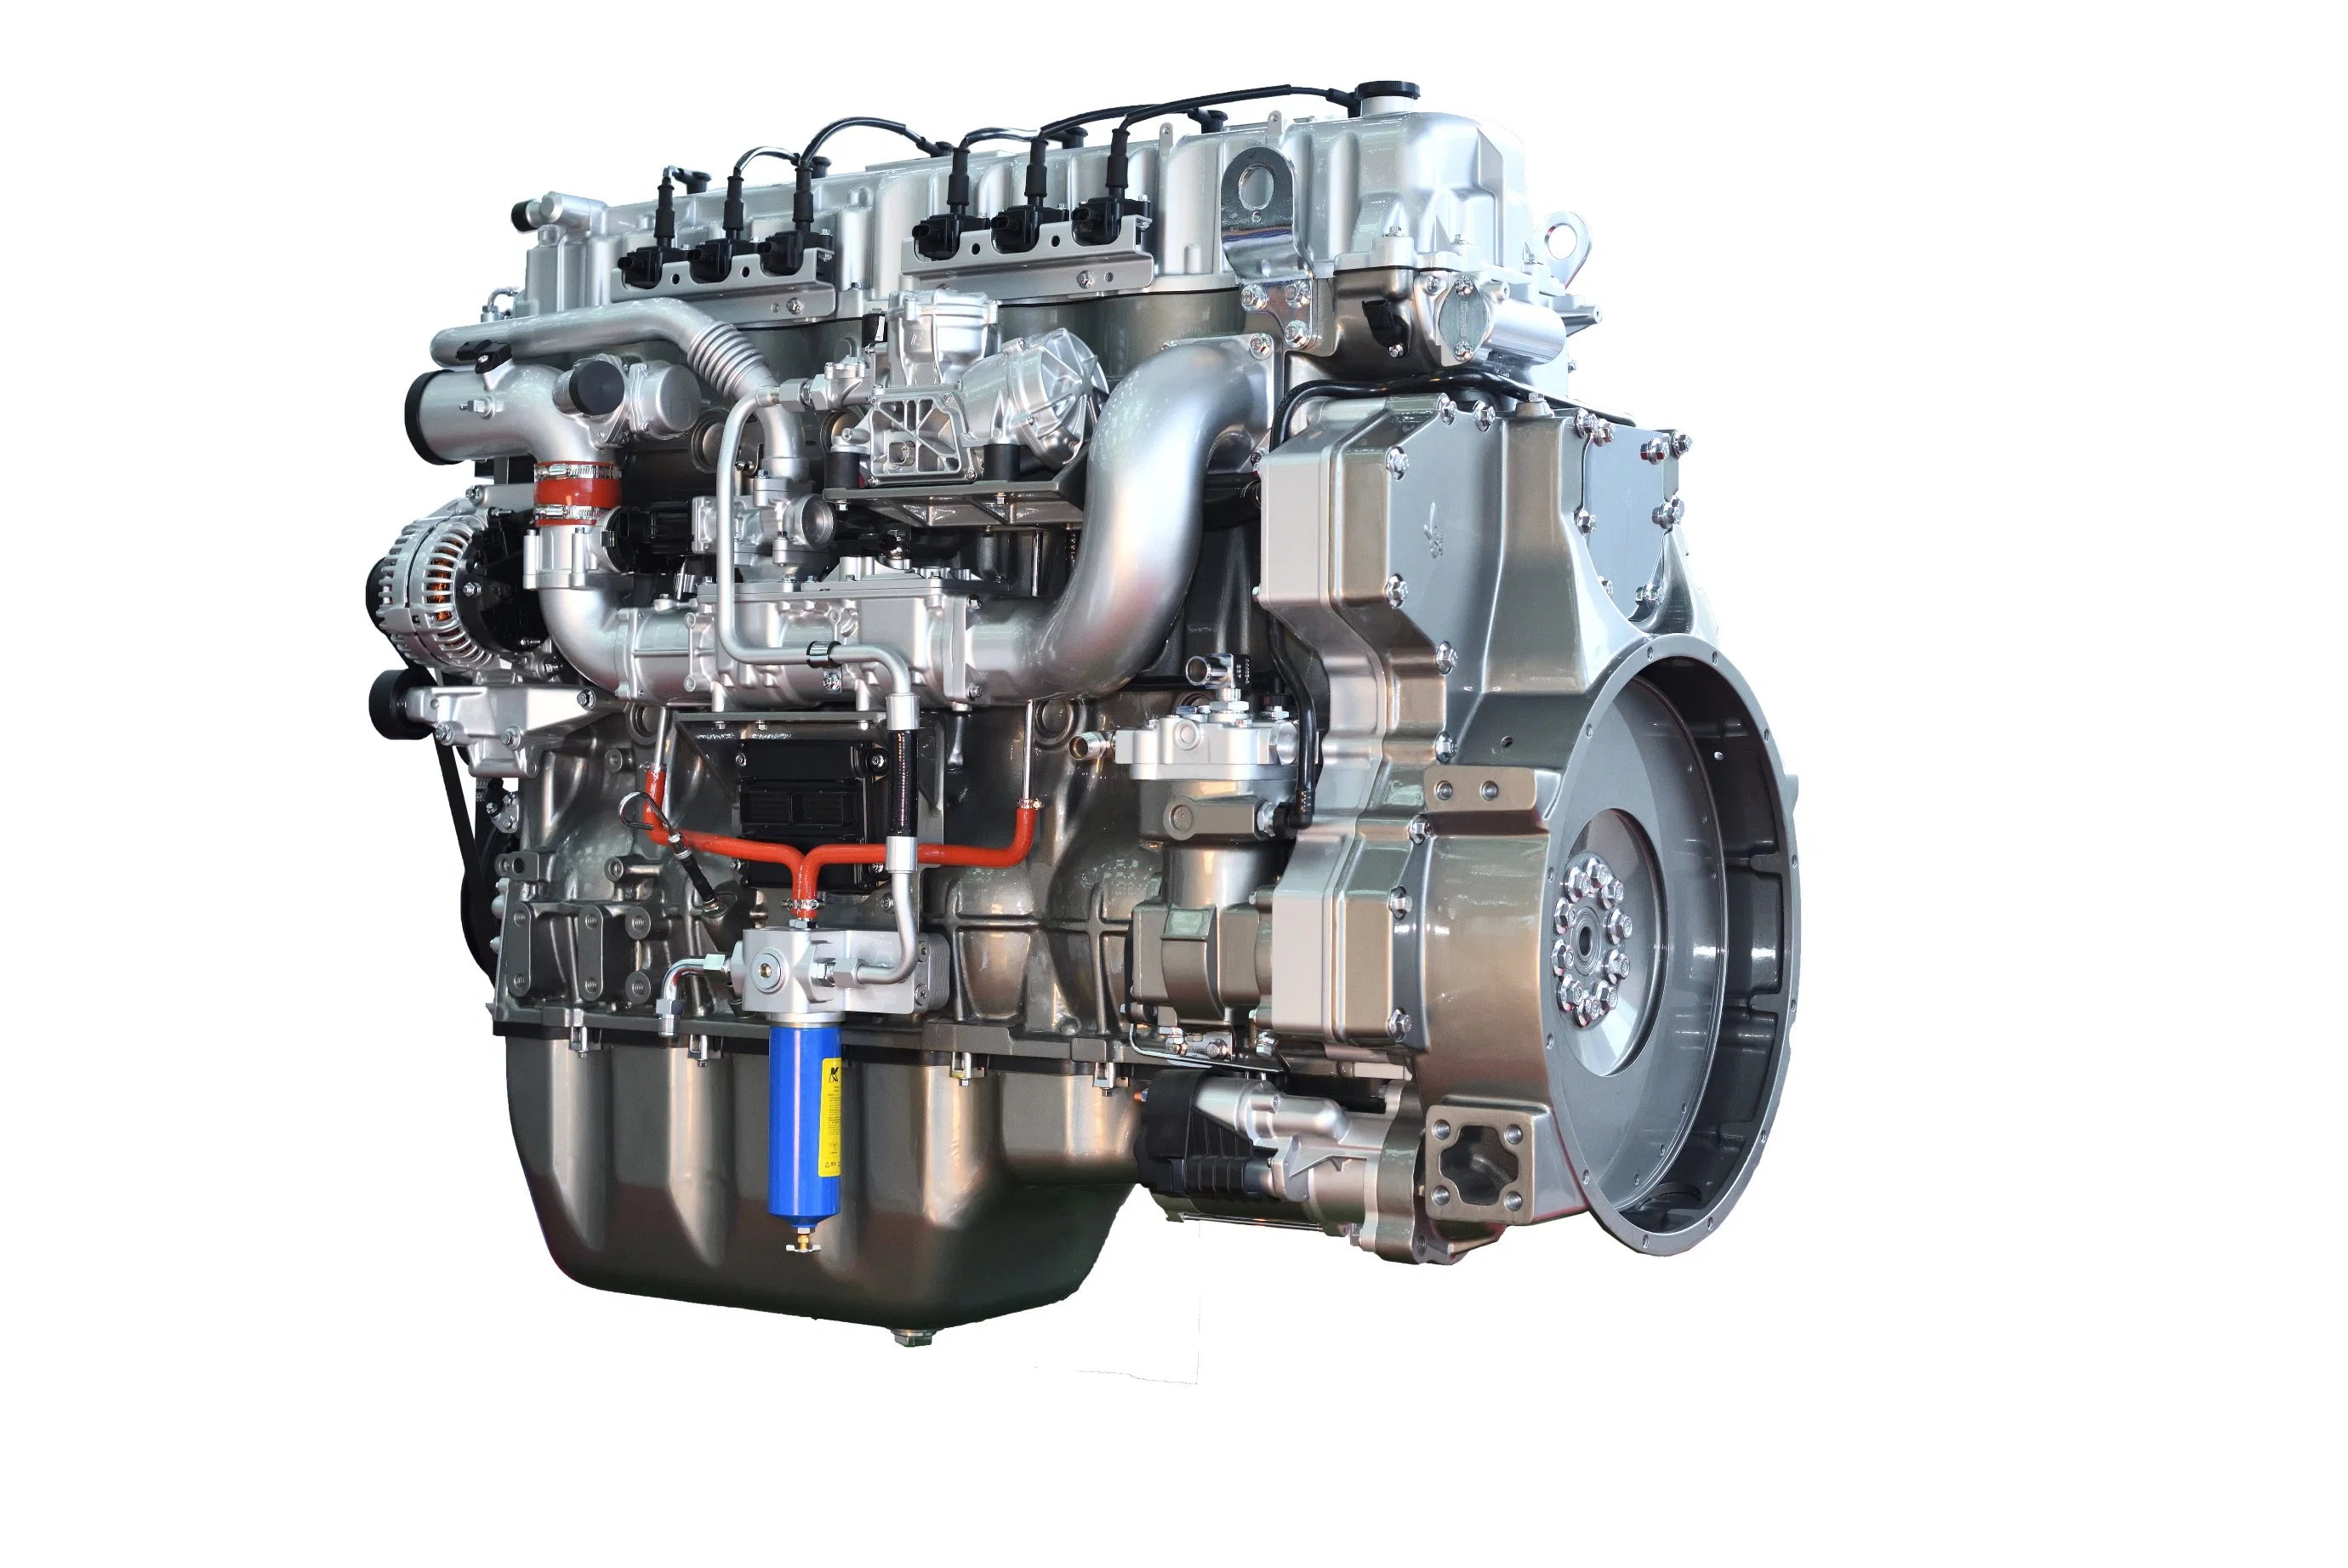 Stabel Yuchai 6K13 Euro 5 Emission Heavy-Duty Diesel Engine with High Power, High Reliability, Low Fuel Consumption, Sufficient Power